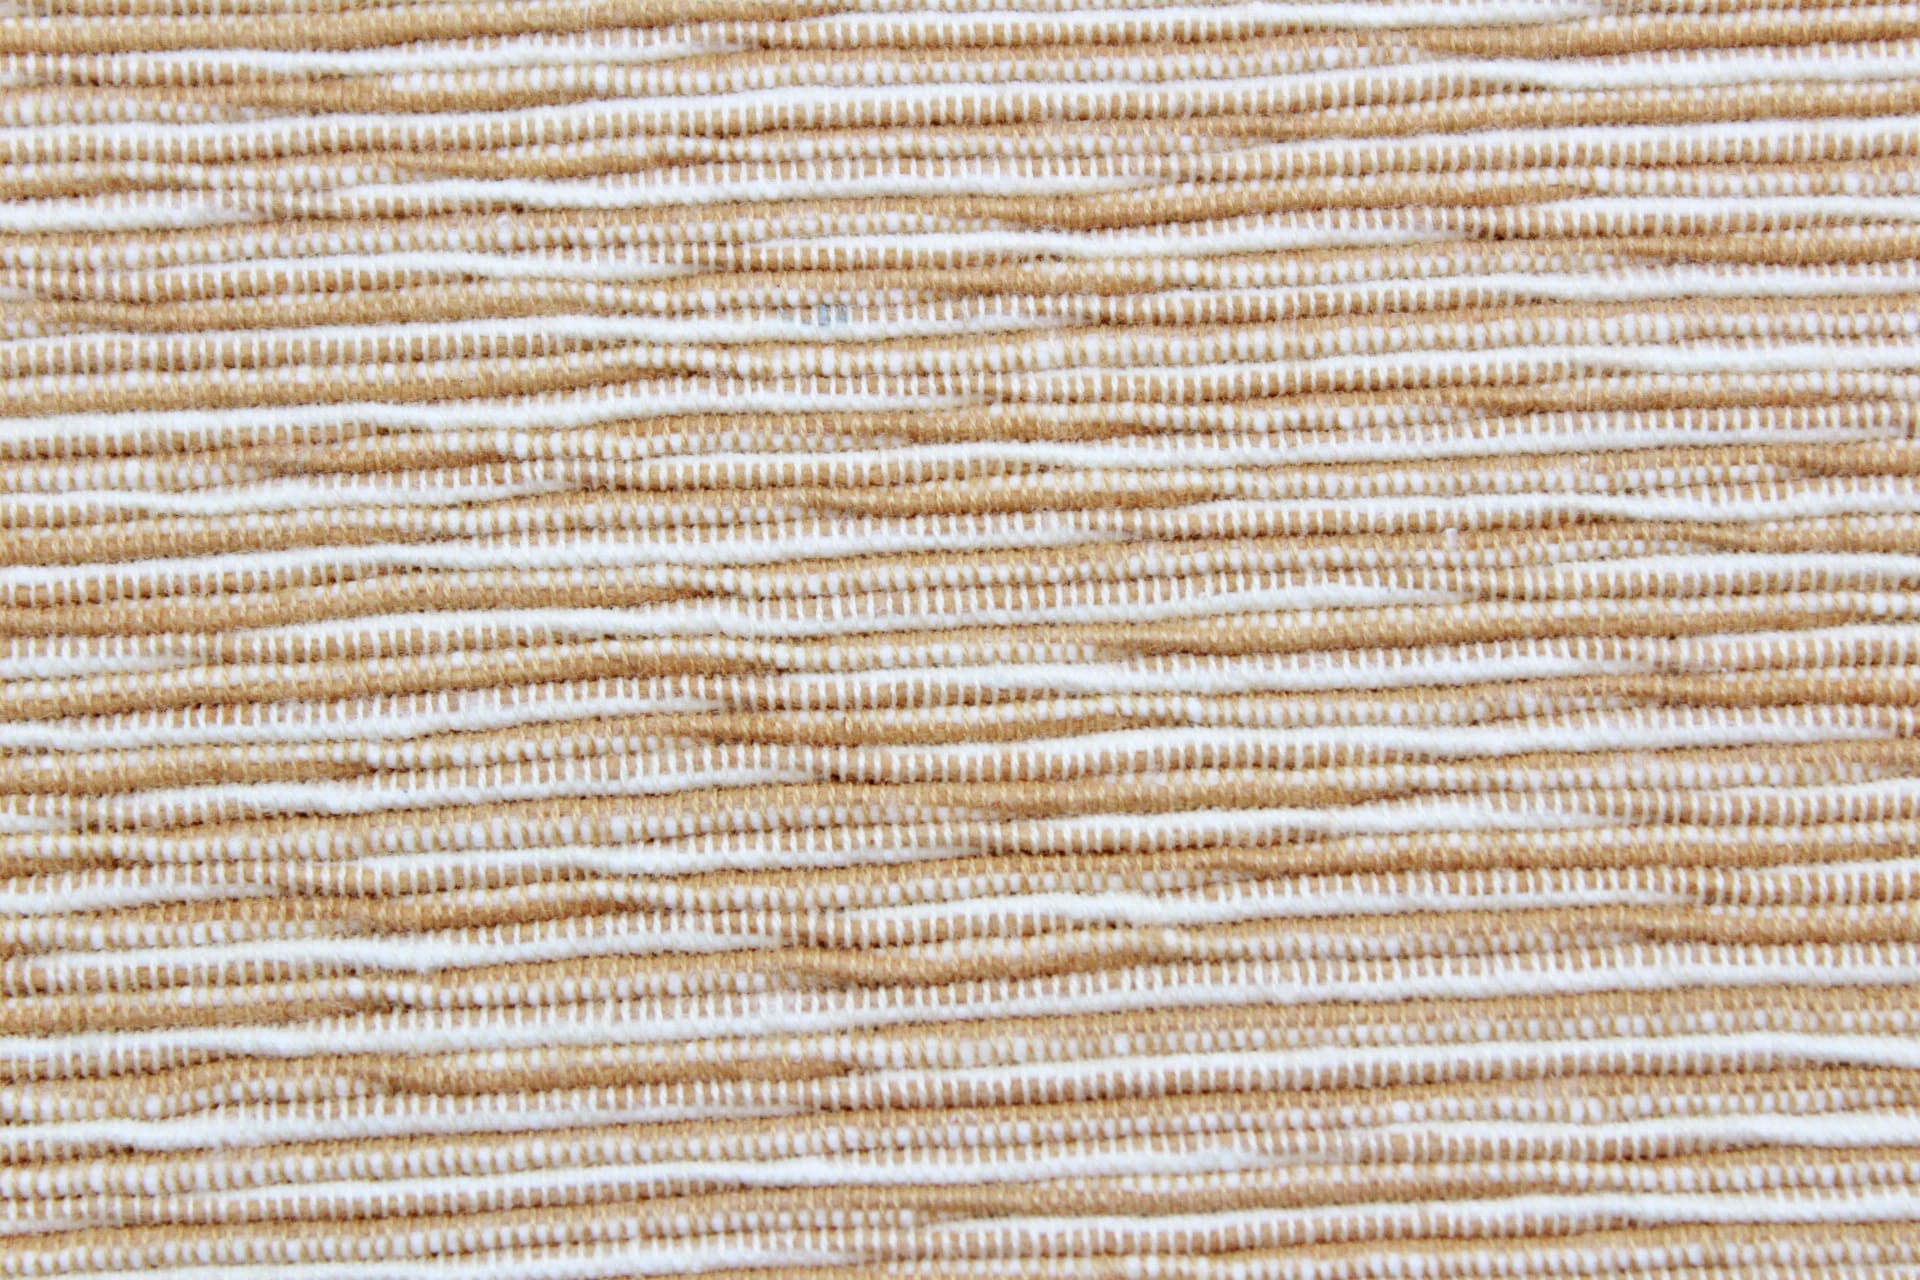 Beige Handloom Corded Weave 385 GSM Plain Cotton Fabric (122 cms) online in India